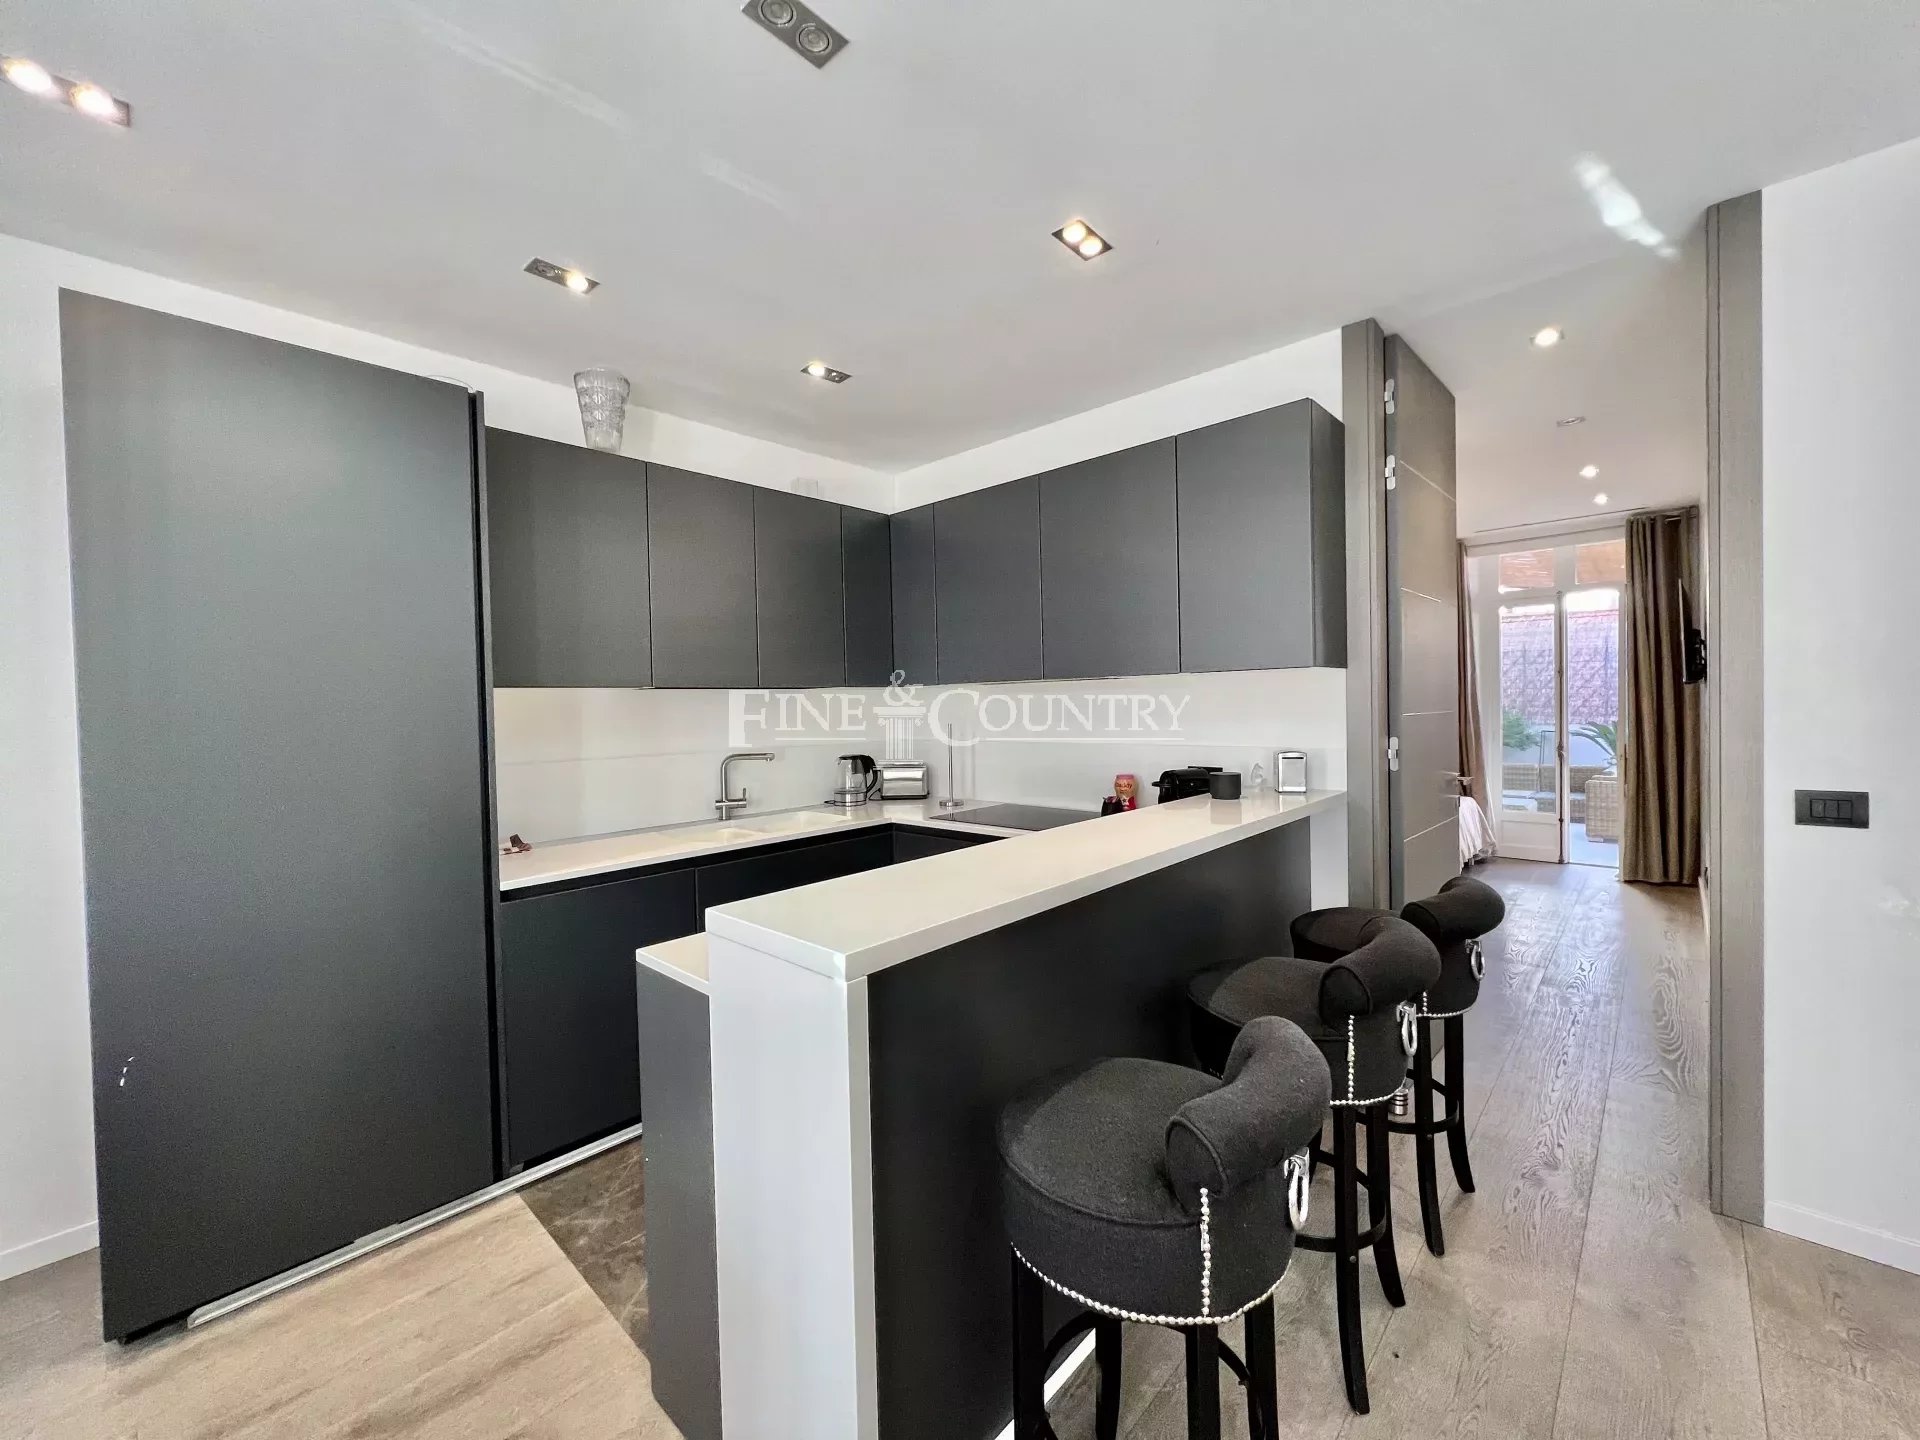 Renovated Apartment for sale in Cannes Center